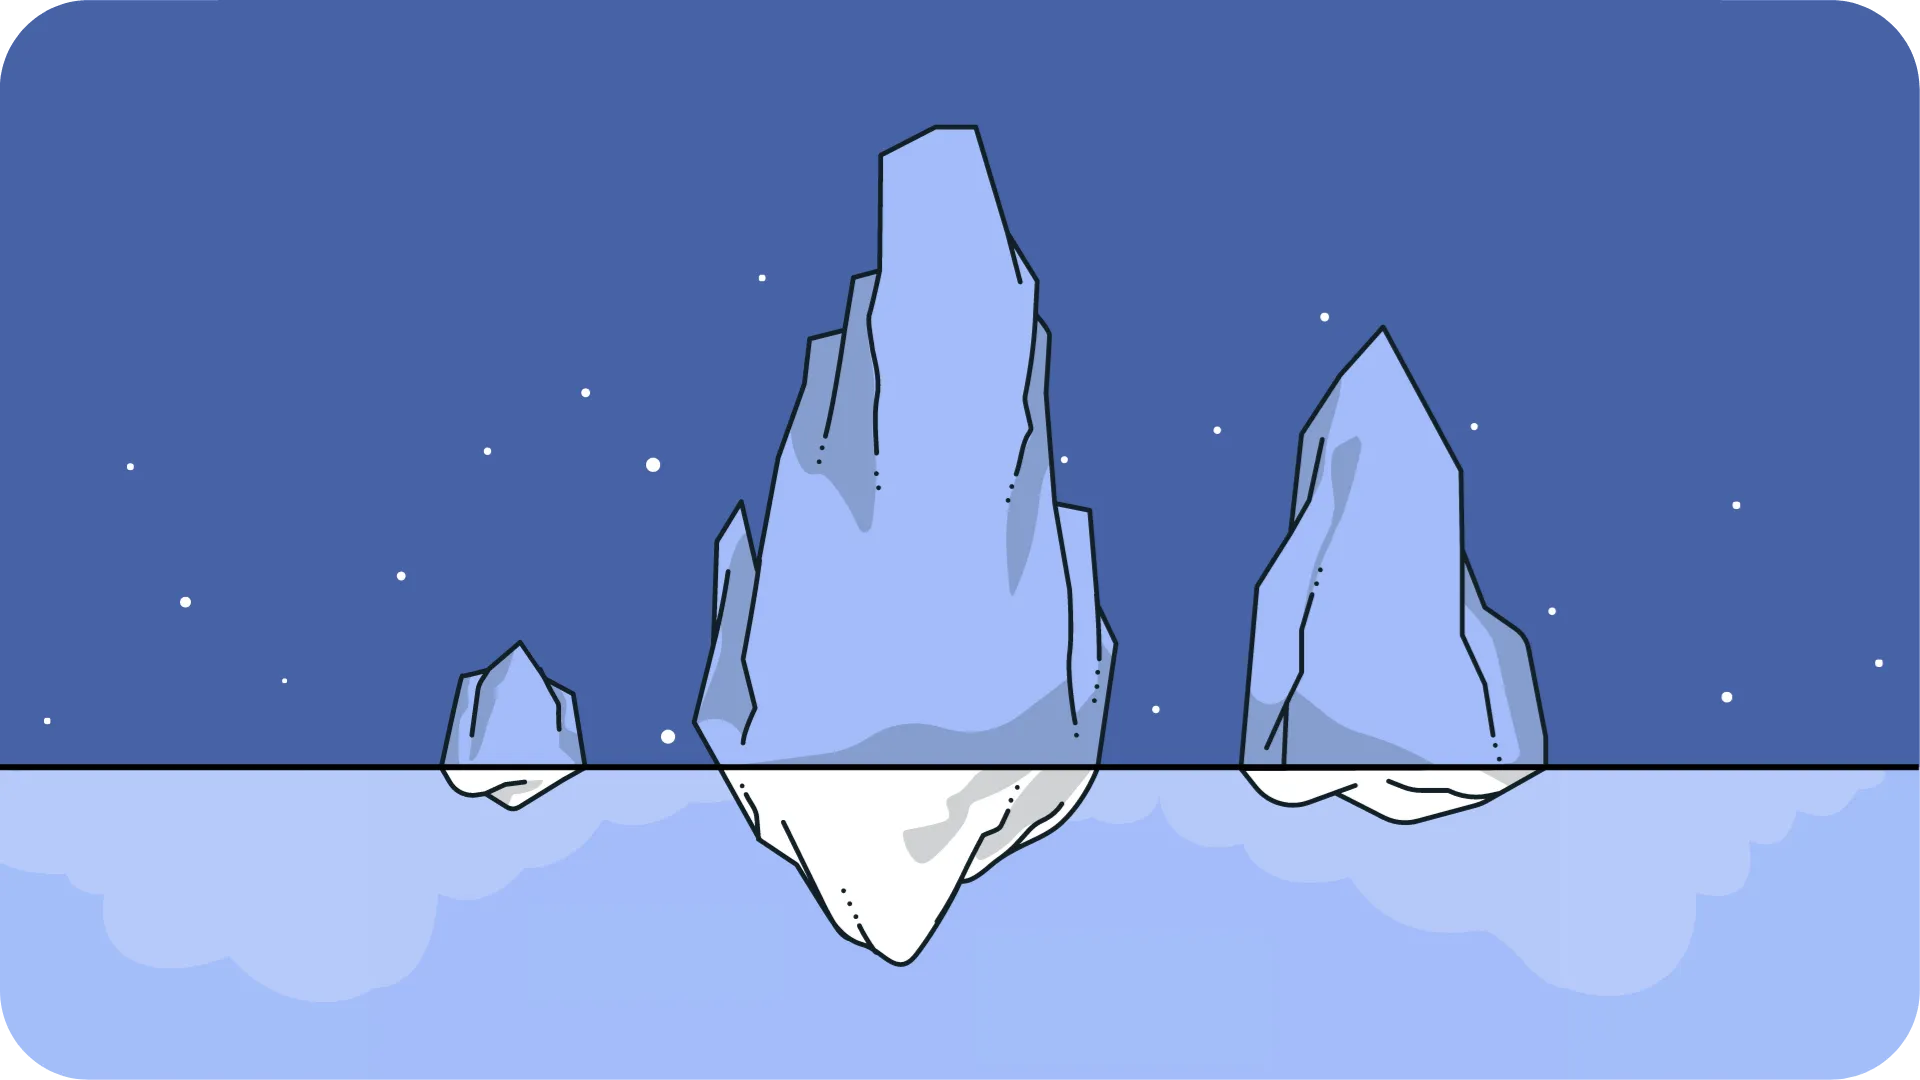 Upside down image of a cartoon style illustration of 3 icebergs - showing the tip above the water and the main body of the iceberg under the water.